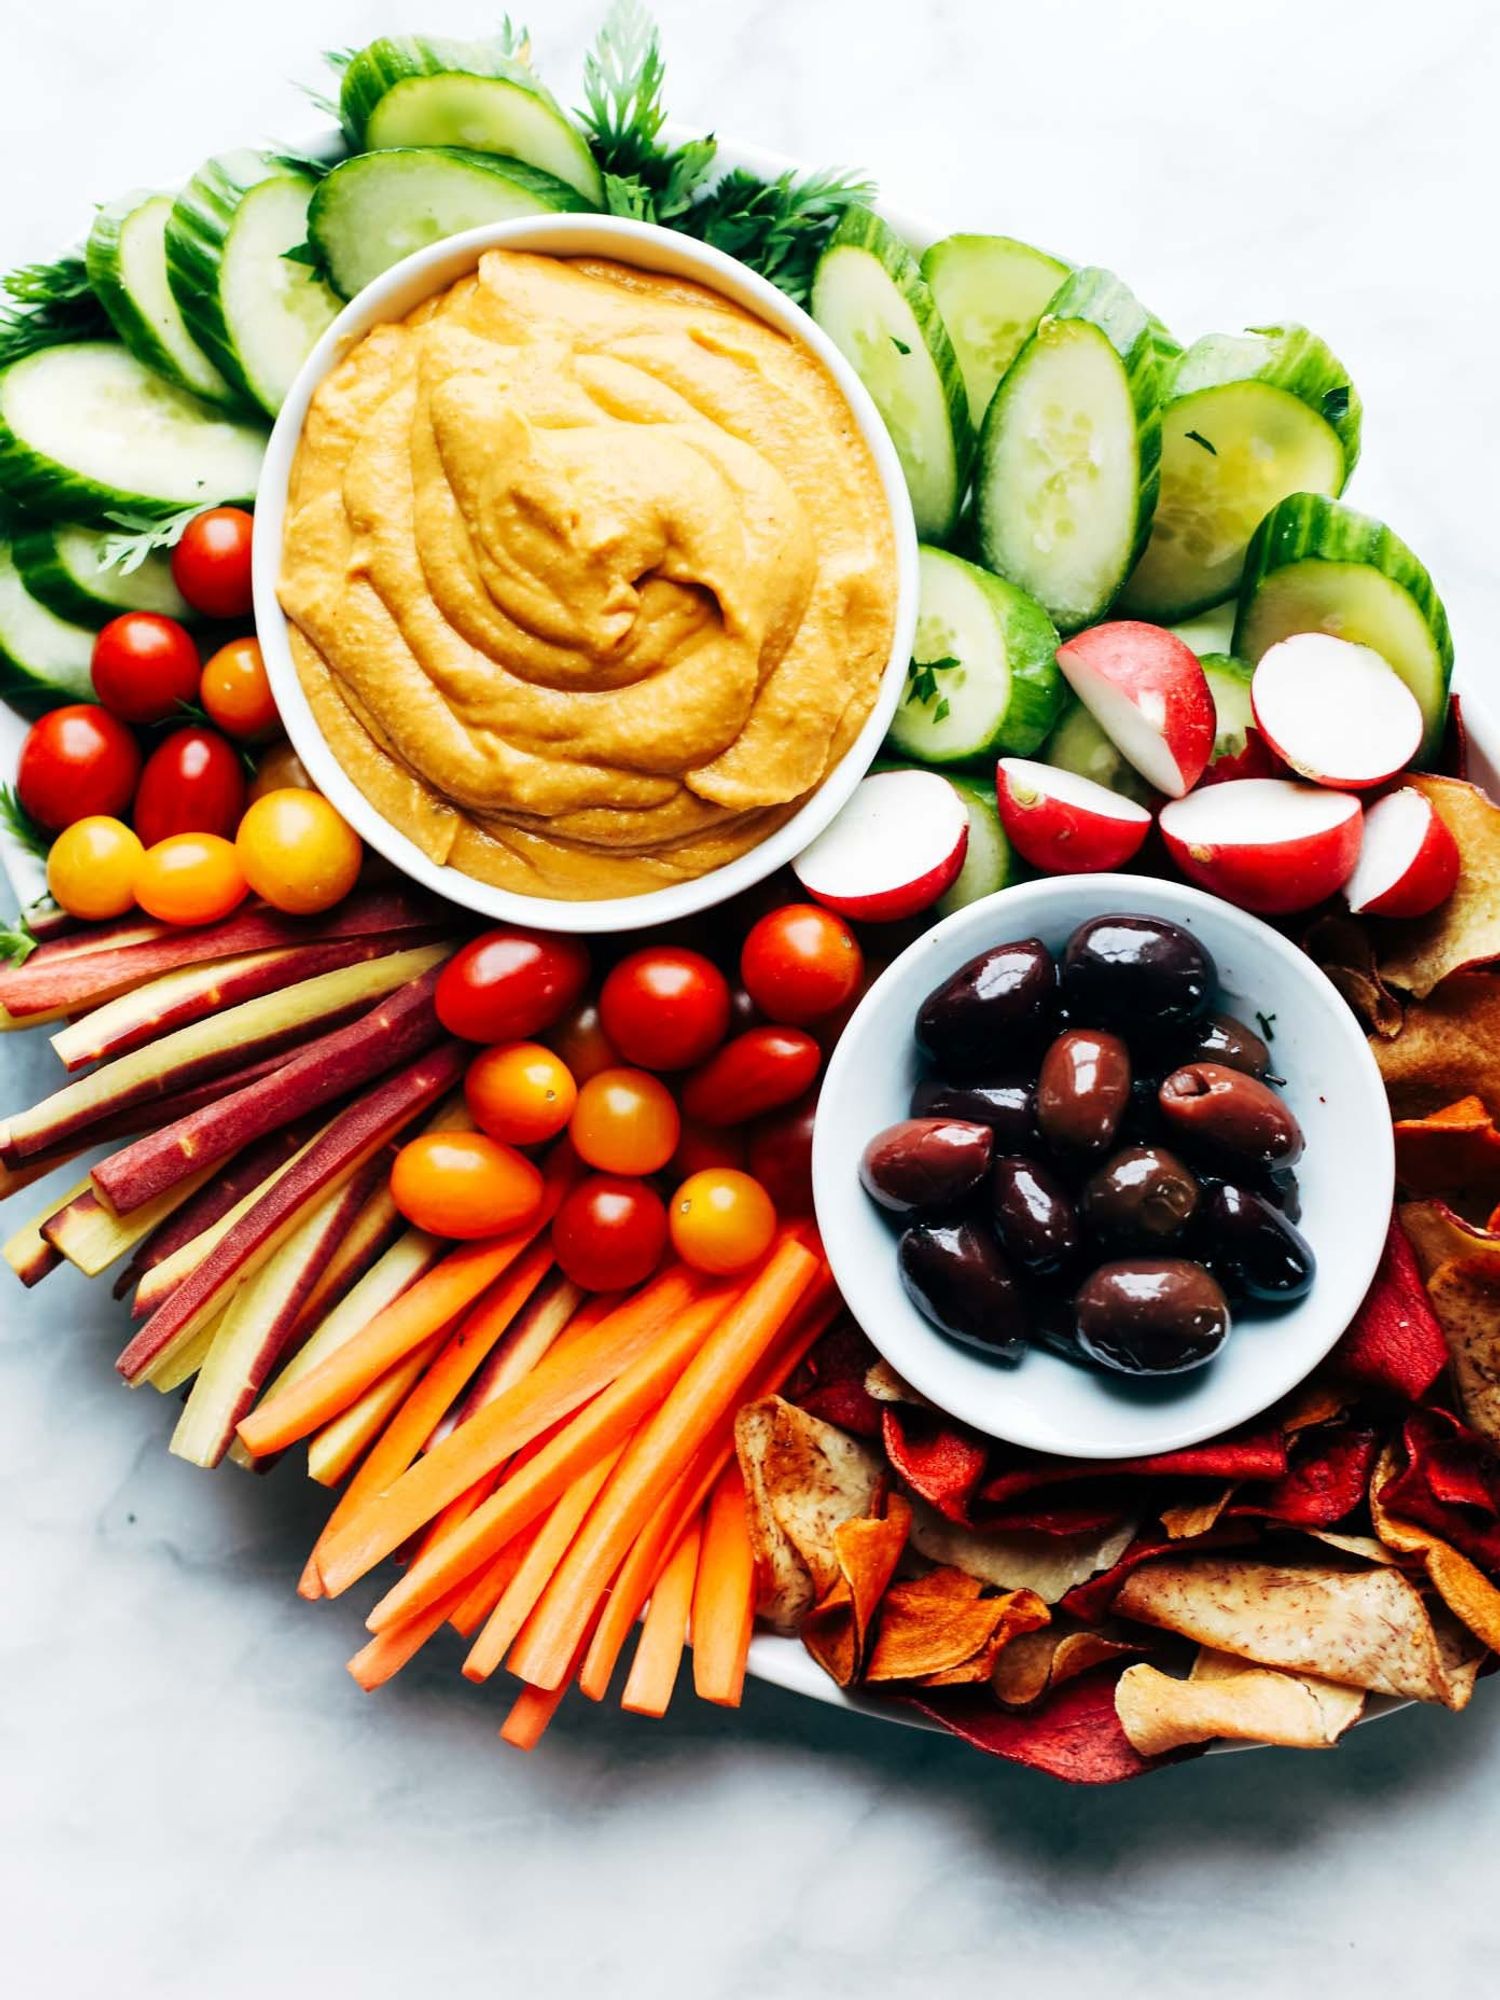 Curry Hummus bowl, with carrots and apple slices, is a great holiday appetizer